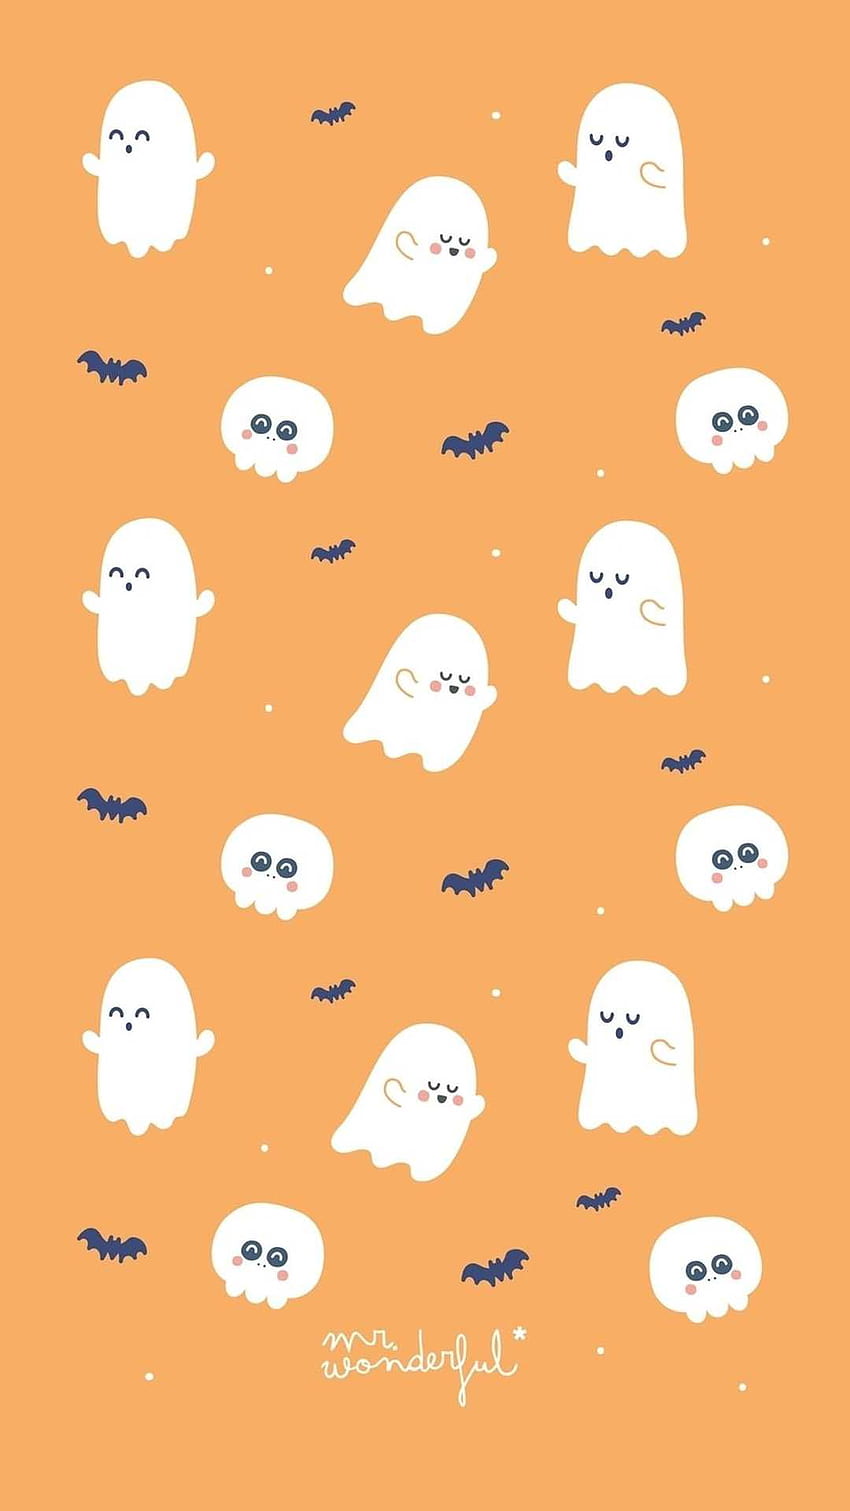 10 Cute Halloween Wallpaper Ideas for Phone  iPhone  Spooky Pink Wallpaper  I Take You  Wedding Readings  Wedding Ideas  Wedding Dresses  Wedding  Theme